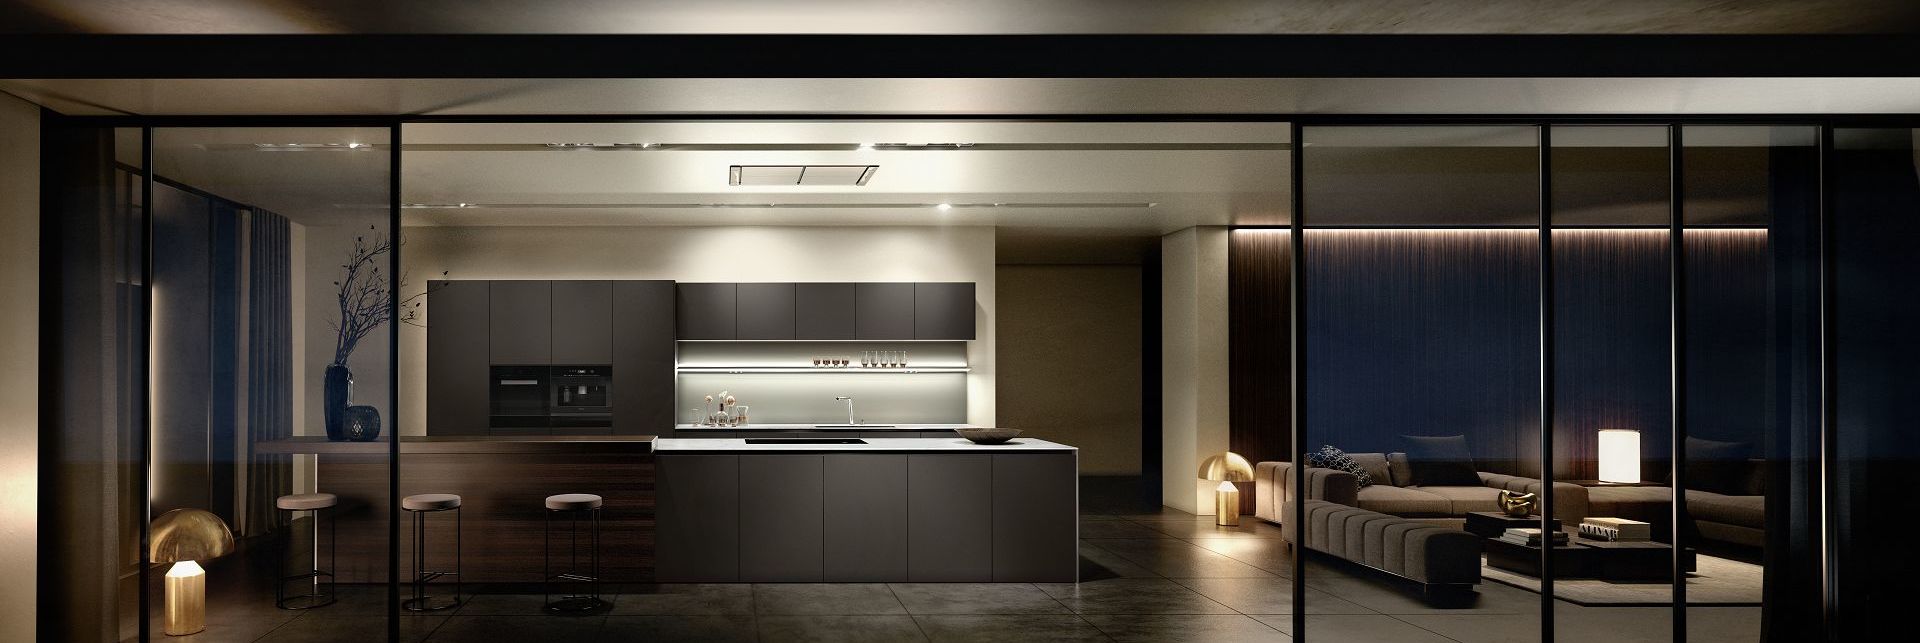 SieMatic Pure S2 SE kitchen island with prep area as well as raised breakfast bar in smoked oak